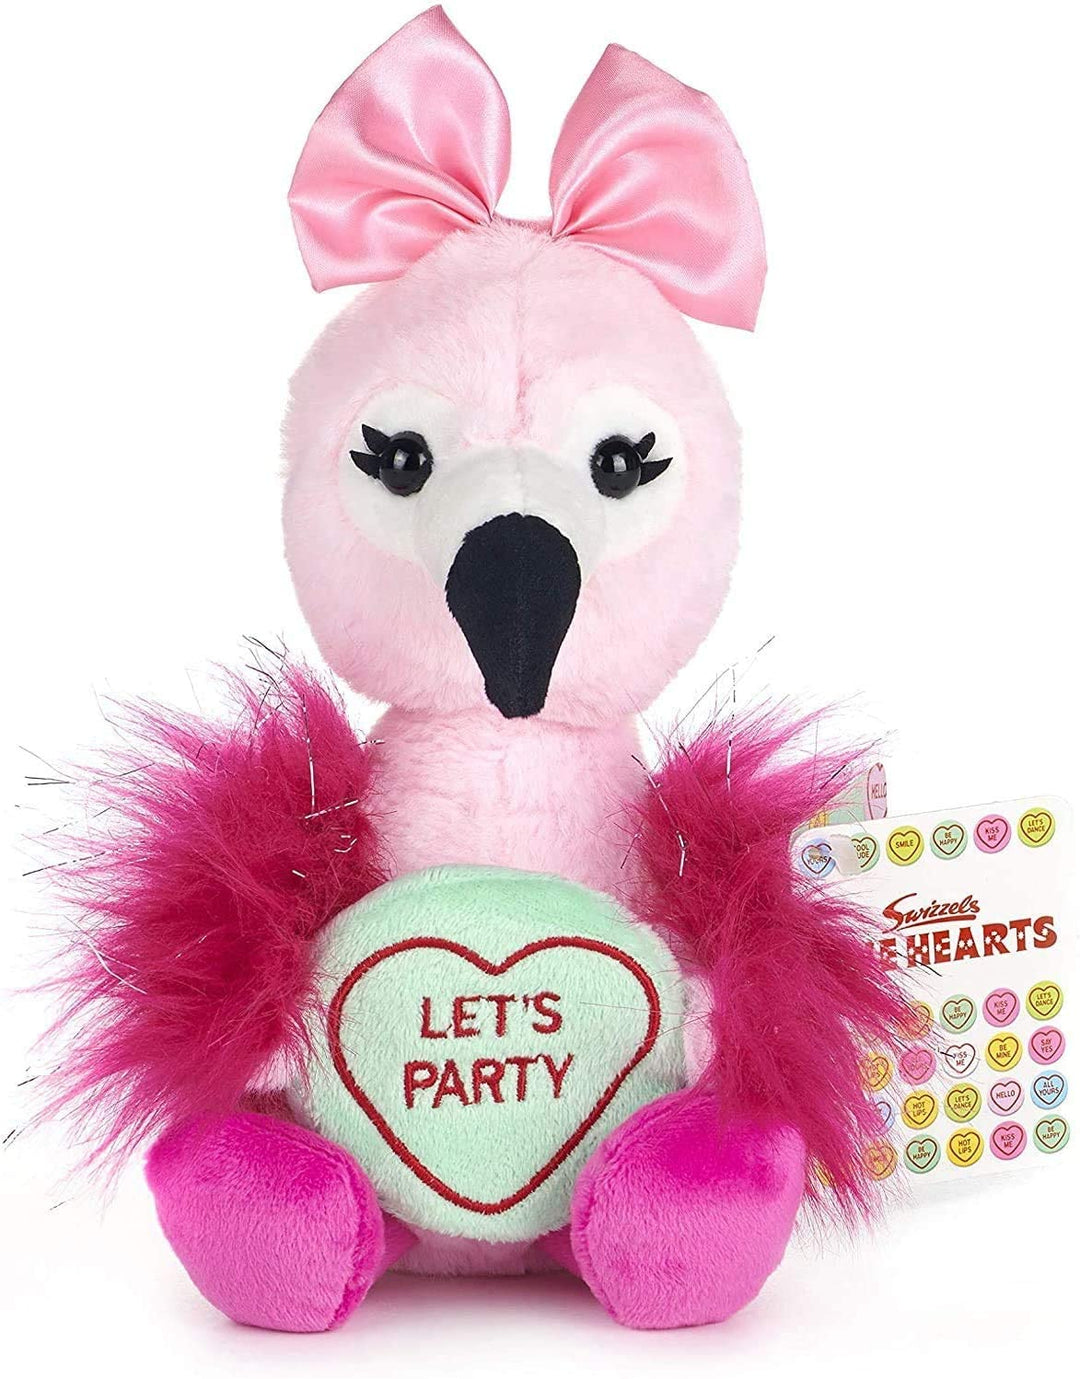 Posh Paws 37330 Swizzels Love Hearts 18cm (7”) Flamingo – Let's Party Message Soft Toy, Pink